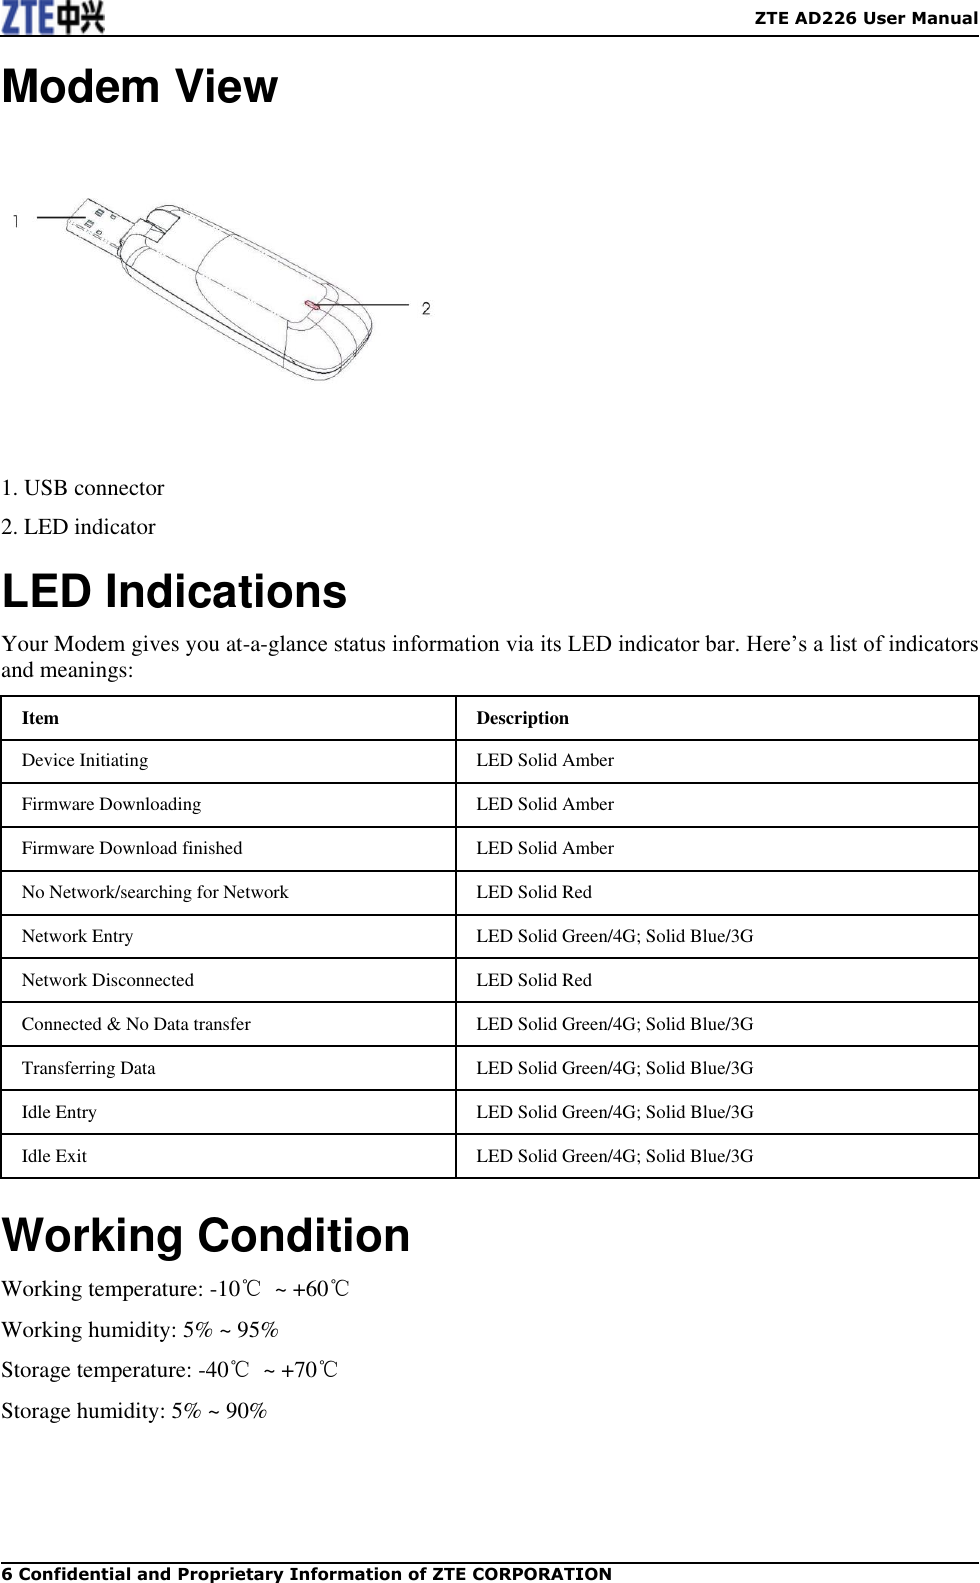    ZTE AD226 User Manual 6 Confidential and Proprietary Information of ZTE CORPORATION Modem View  1. USB connector 2. LED indicator LED Indications Your Modem gives you at-a-glance status information via its LED indicator bar. Here‟s a list of indicators and meanings: Item Description Device Initiating LED Solid Amber Firmware Downloading LED Solid Amber Firmware Download finished LED Solid Amber No Network/searching for Network LED Solid Red Network Entry LED Solid Green/4G; Solid Blue/3G Network Disconnected LED Solid Red Connected &amp; No Data transfer LED Solid Green/4G; Solid Blue/3G Transferring Data LED Solid Green/4G; Solid Blue/3G Idle Entry LED Solid Green/4G; Solid Blue/3G Idle Exit LED Solid Green/4G; Solid Blue/3G  Working Condition Working temperature: -10℃  ~ +60℃ Working humidity: 5% ~ 95% Storage temperature: -40℃  ~ +70℃ Storage humidity: 5% ~ 90%  